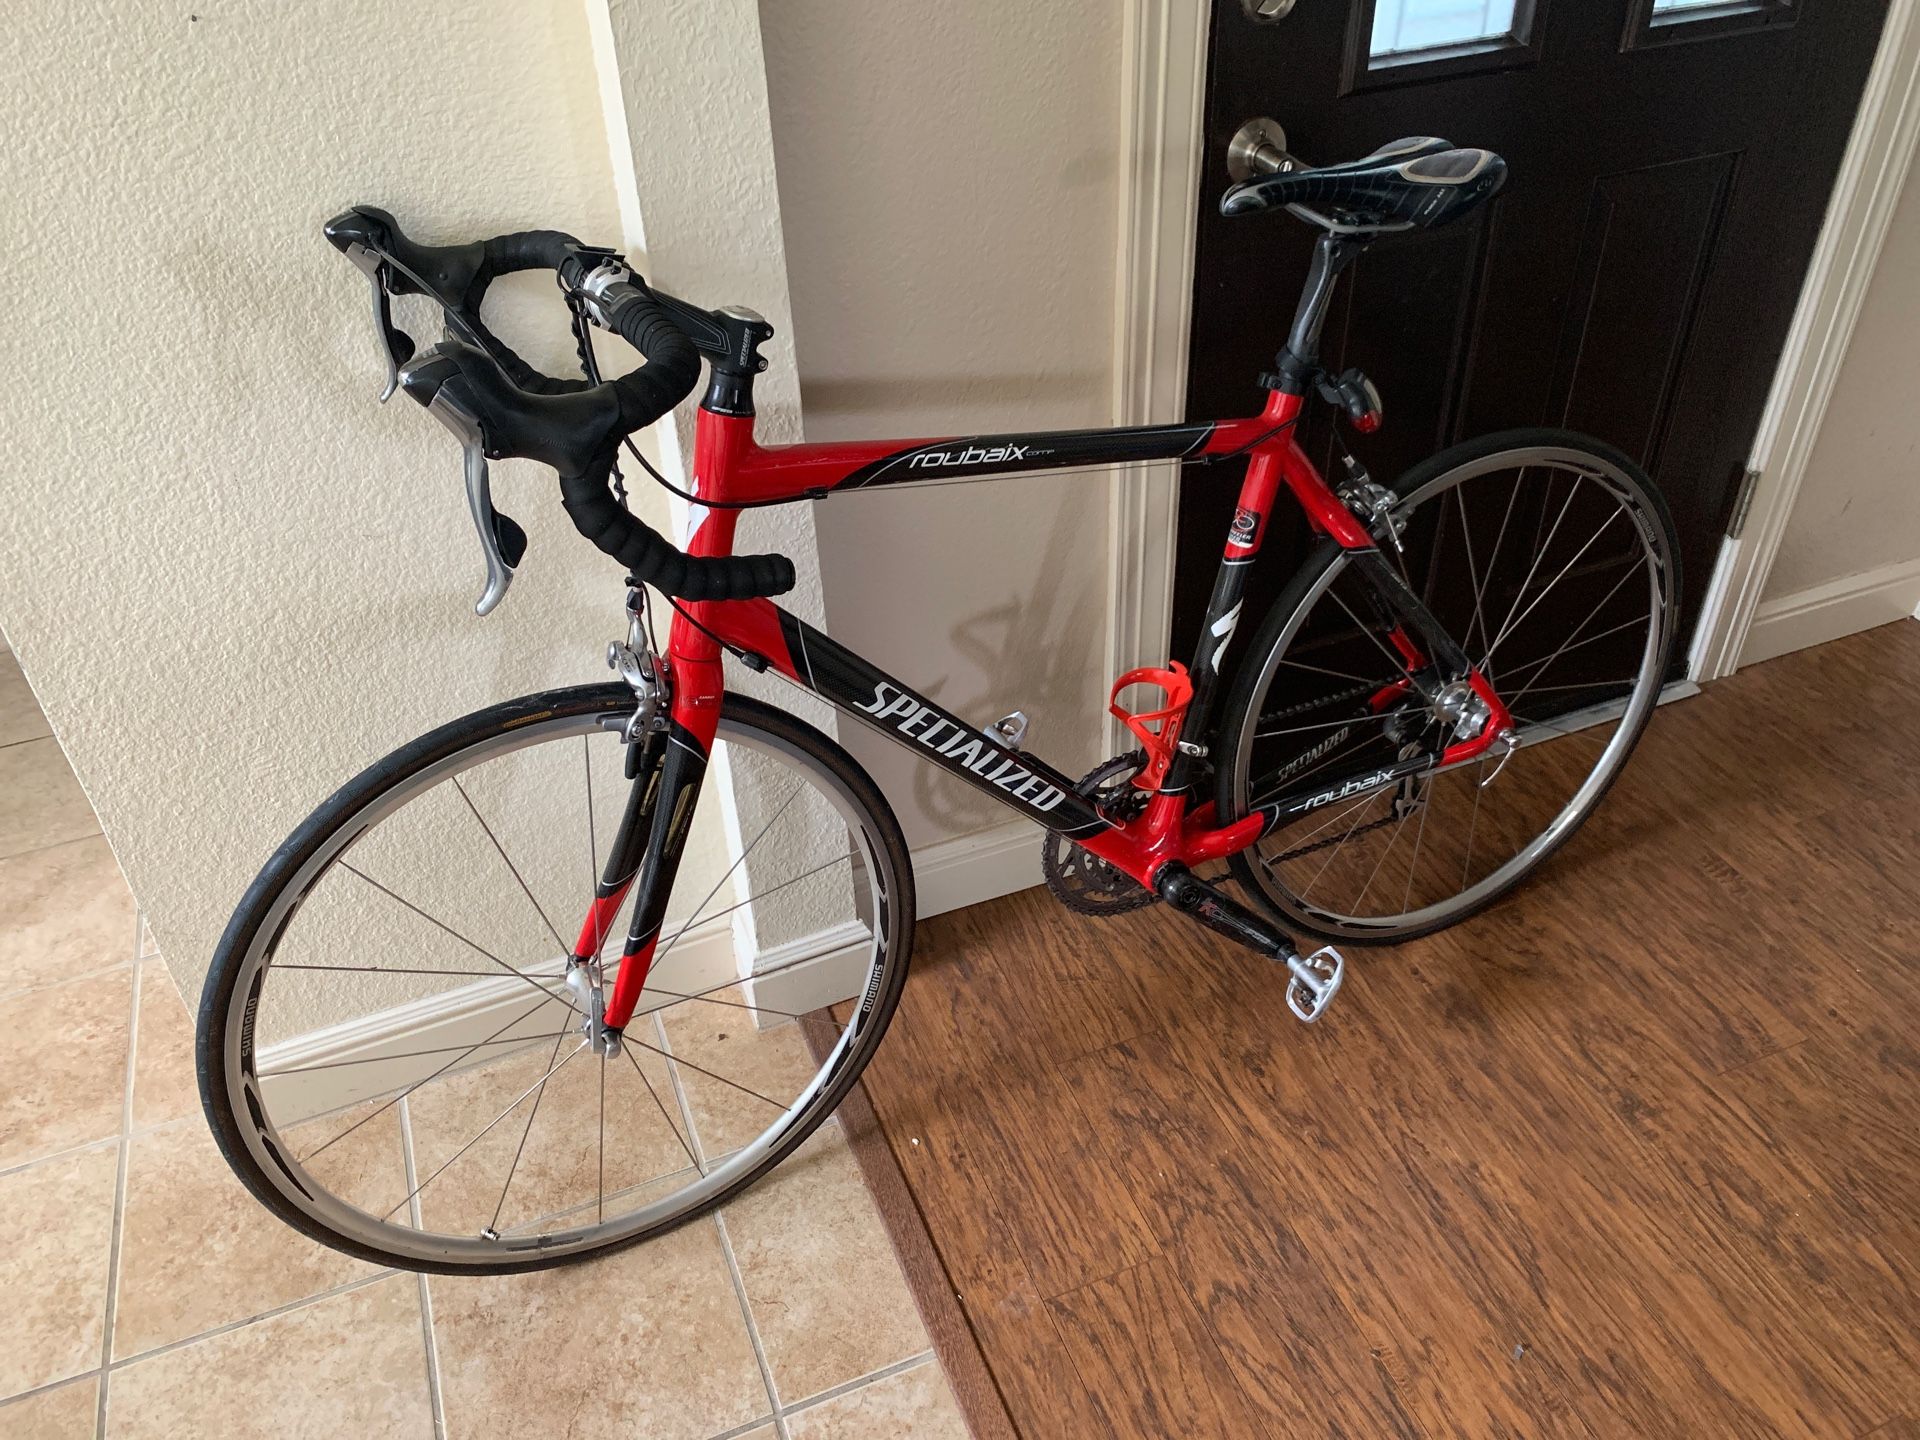 Roubaix Specialized Road Bike with Multiple Spare Parts and Safety Items